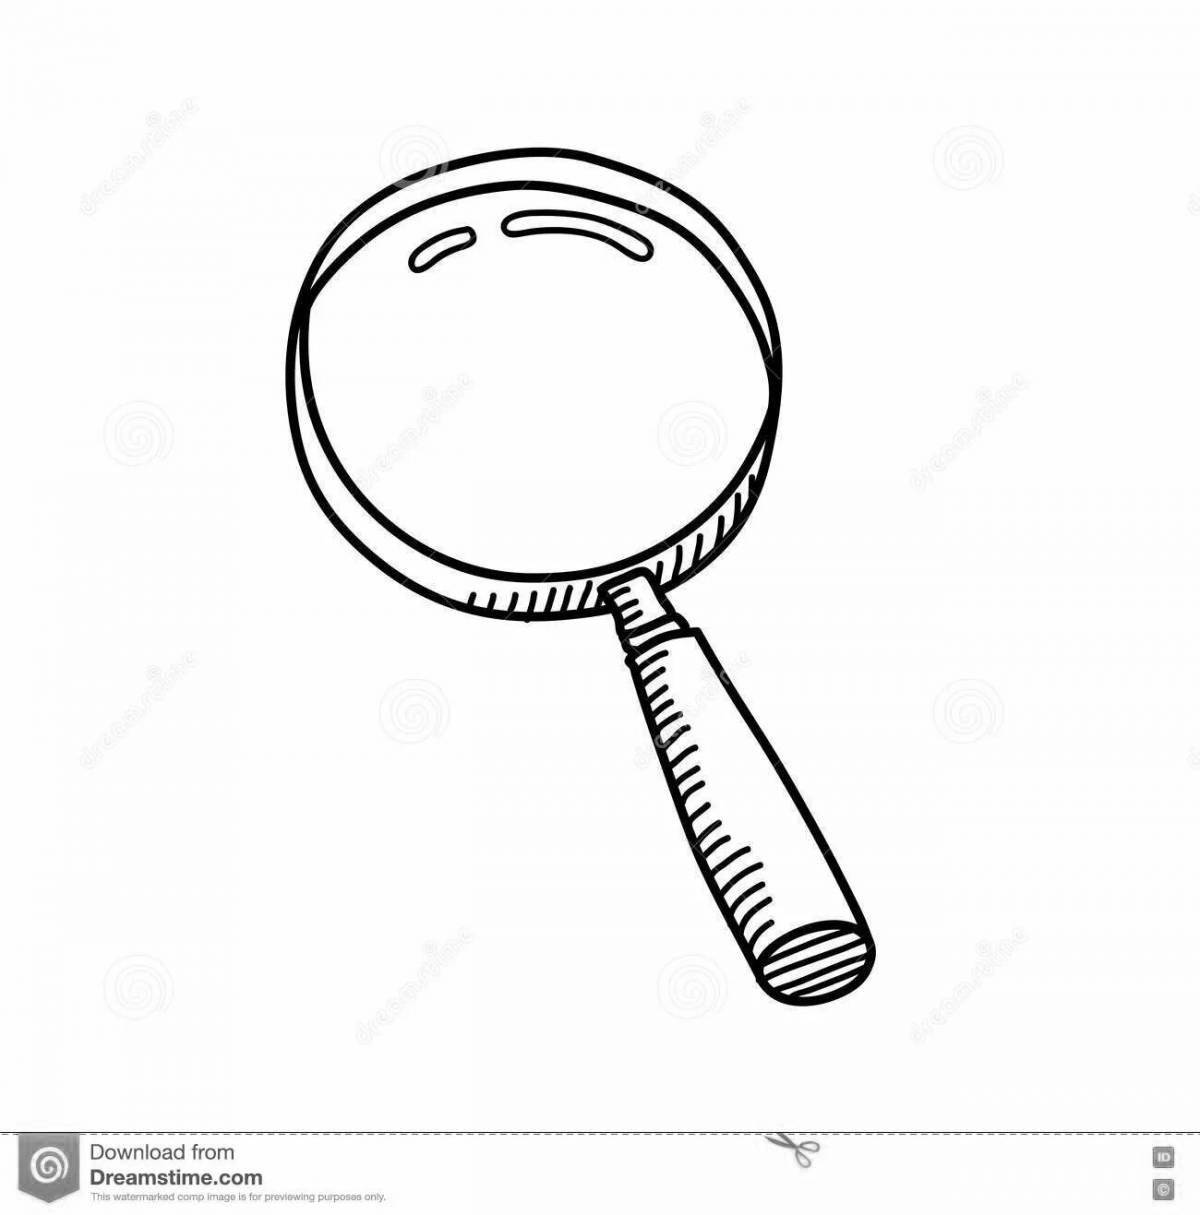 Coloring rainbow magnifying glass for kids